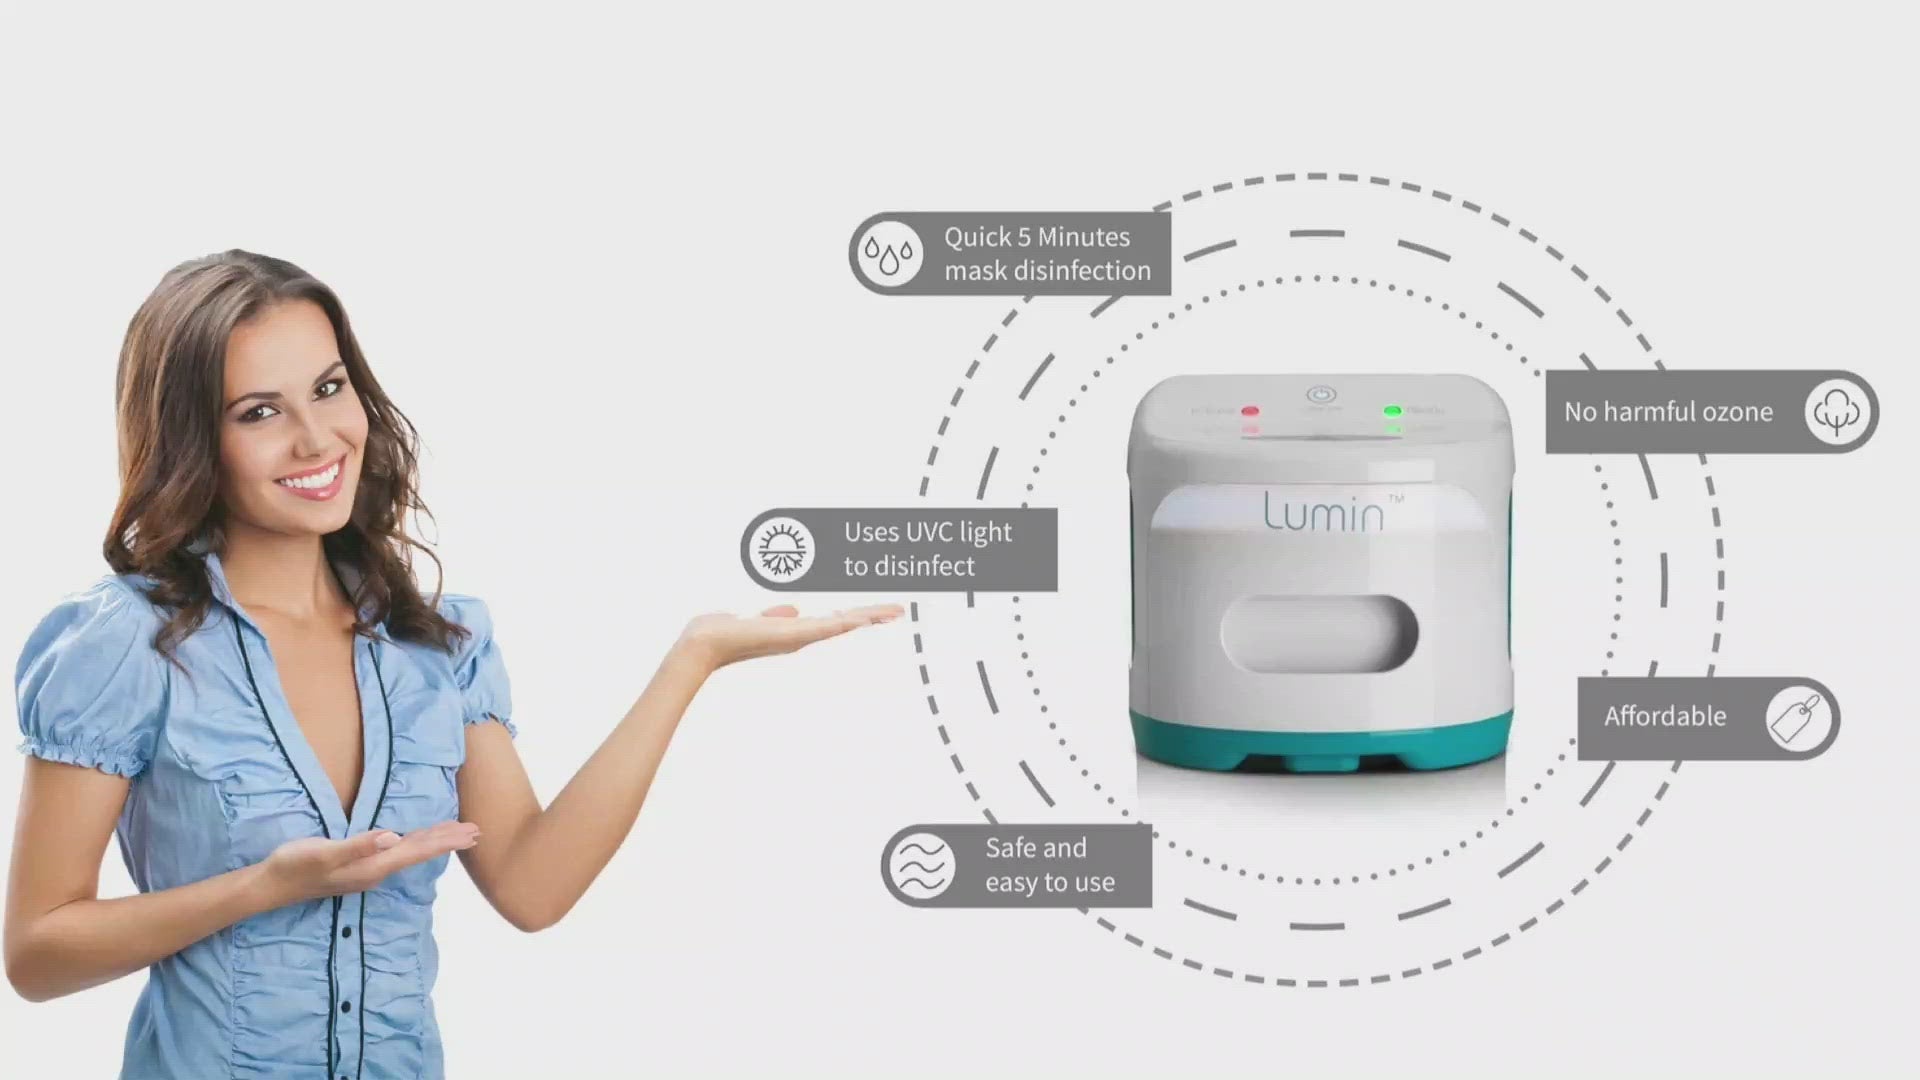 About Lumin UVC - Sanitizing System, cleaning CPAP mask